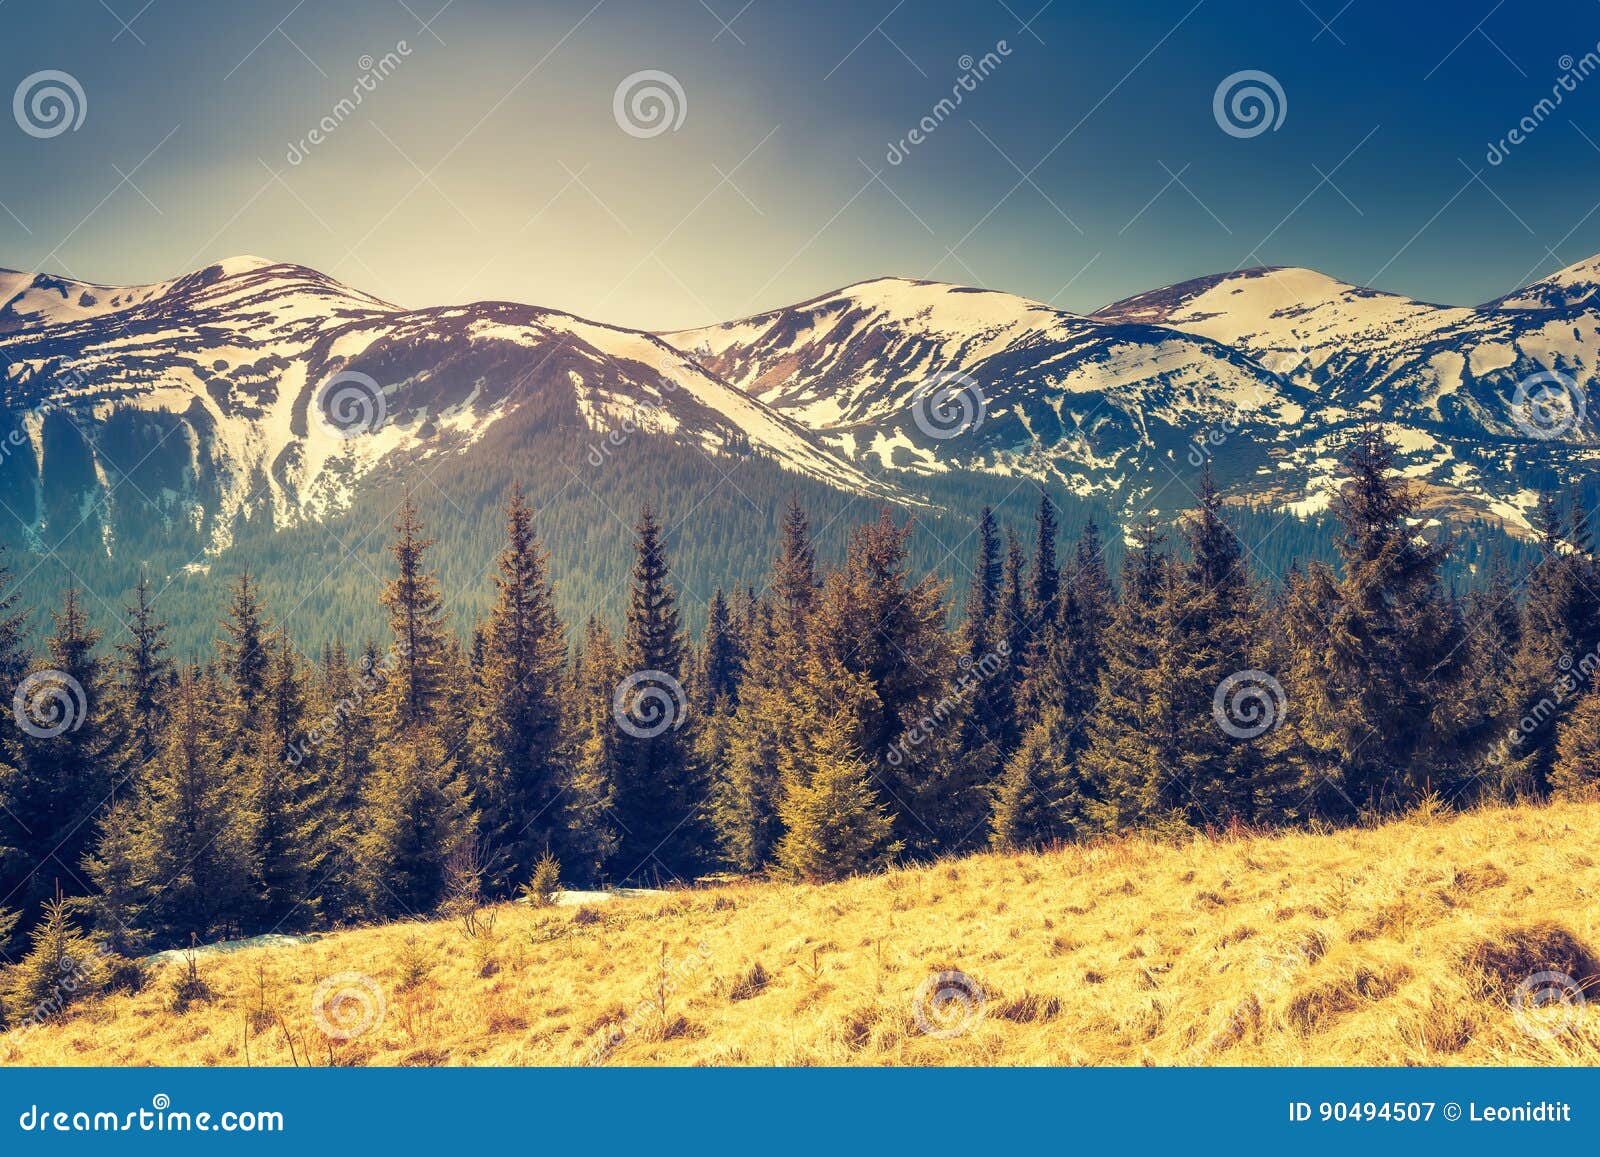 Magical Mountains Landscape Stock Image Image Of Plant Light 90494507